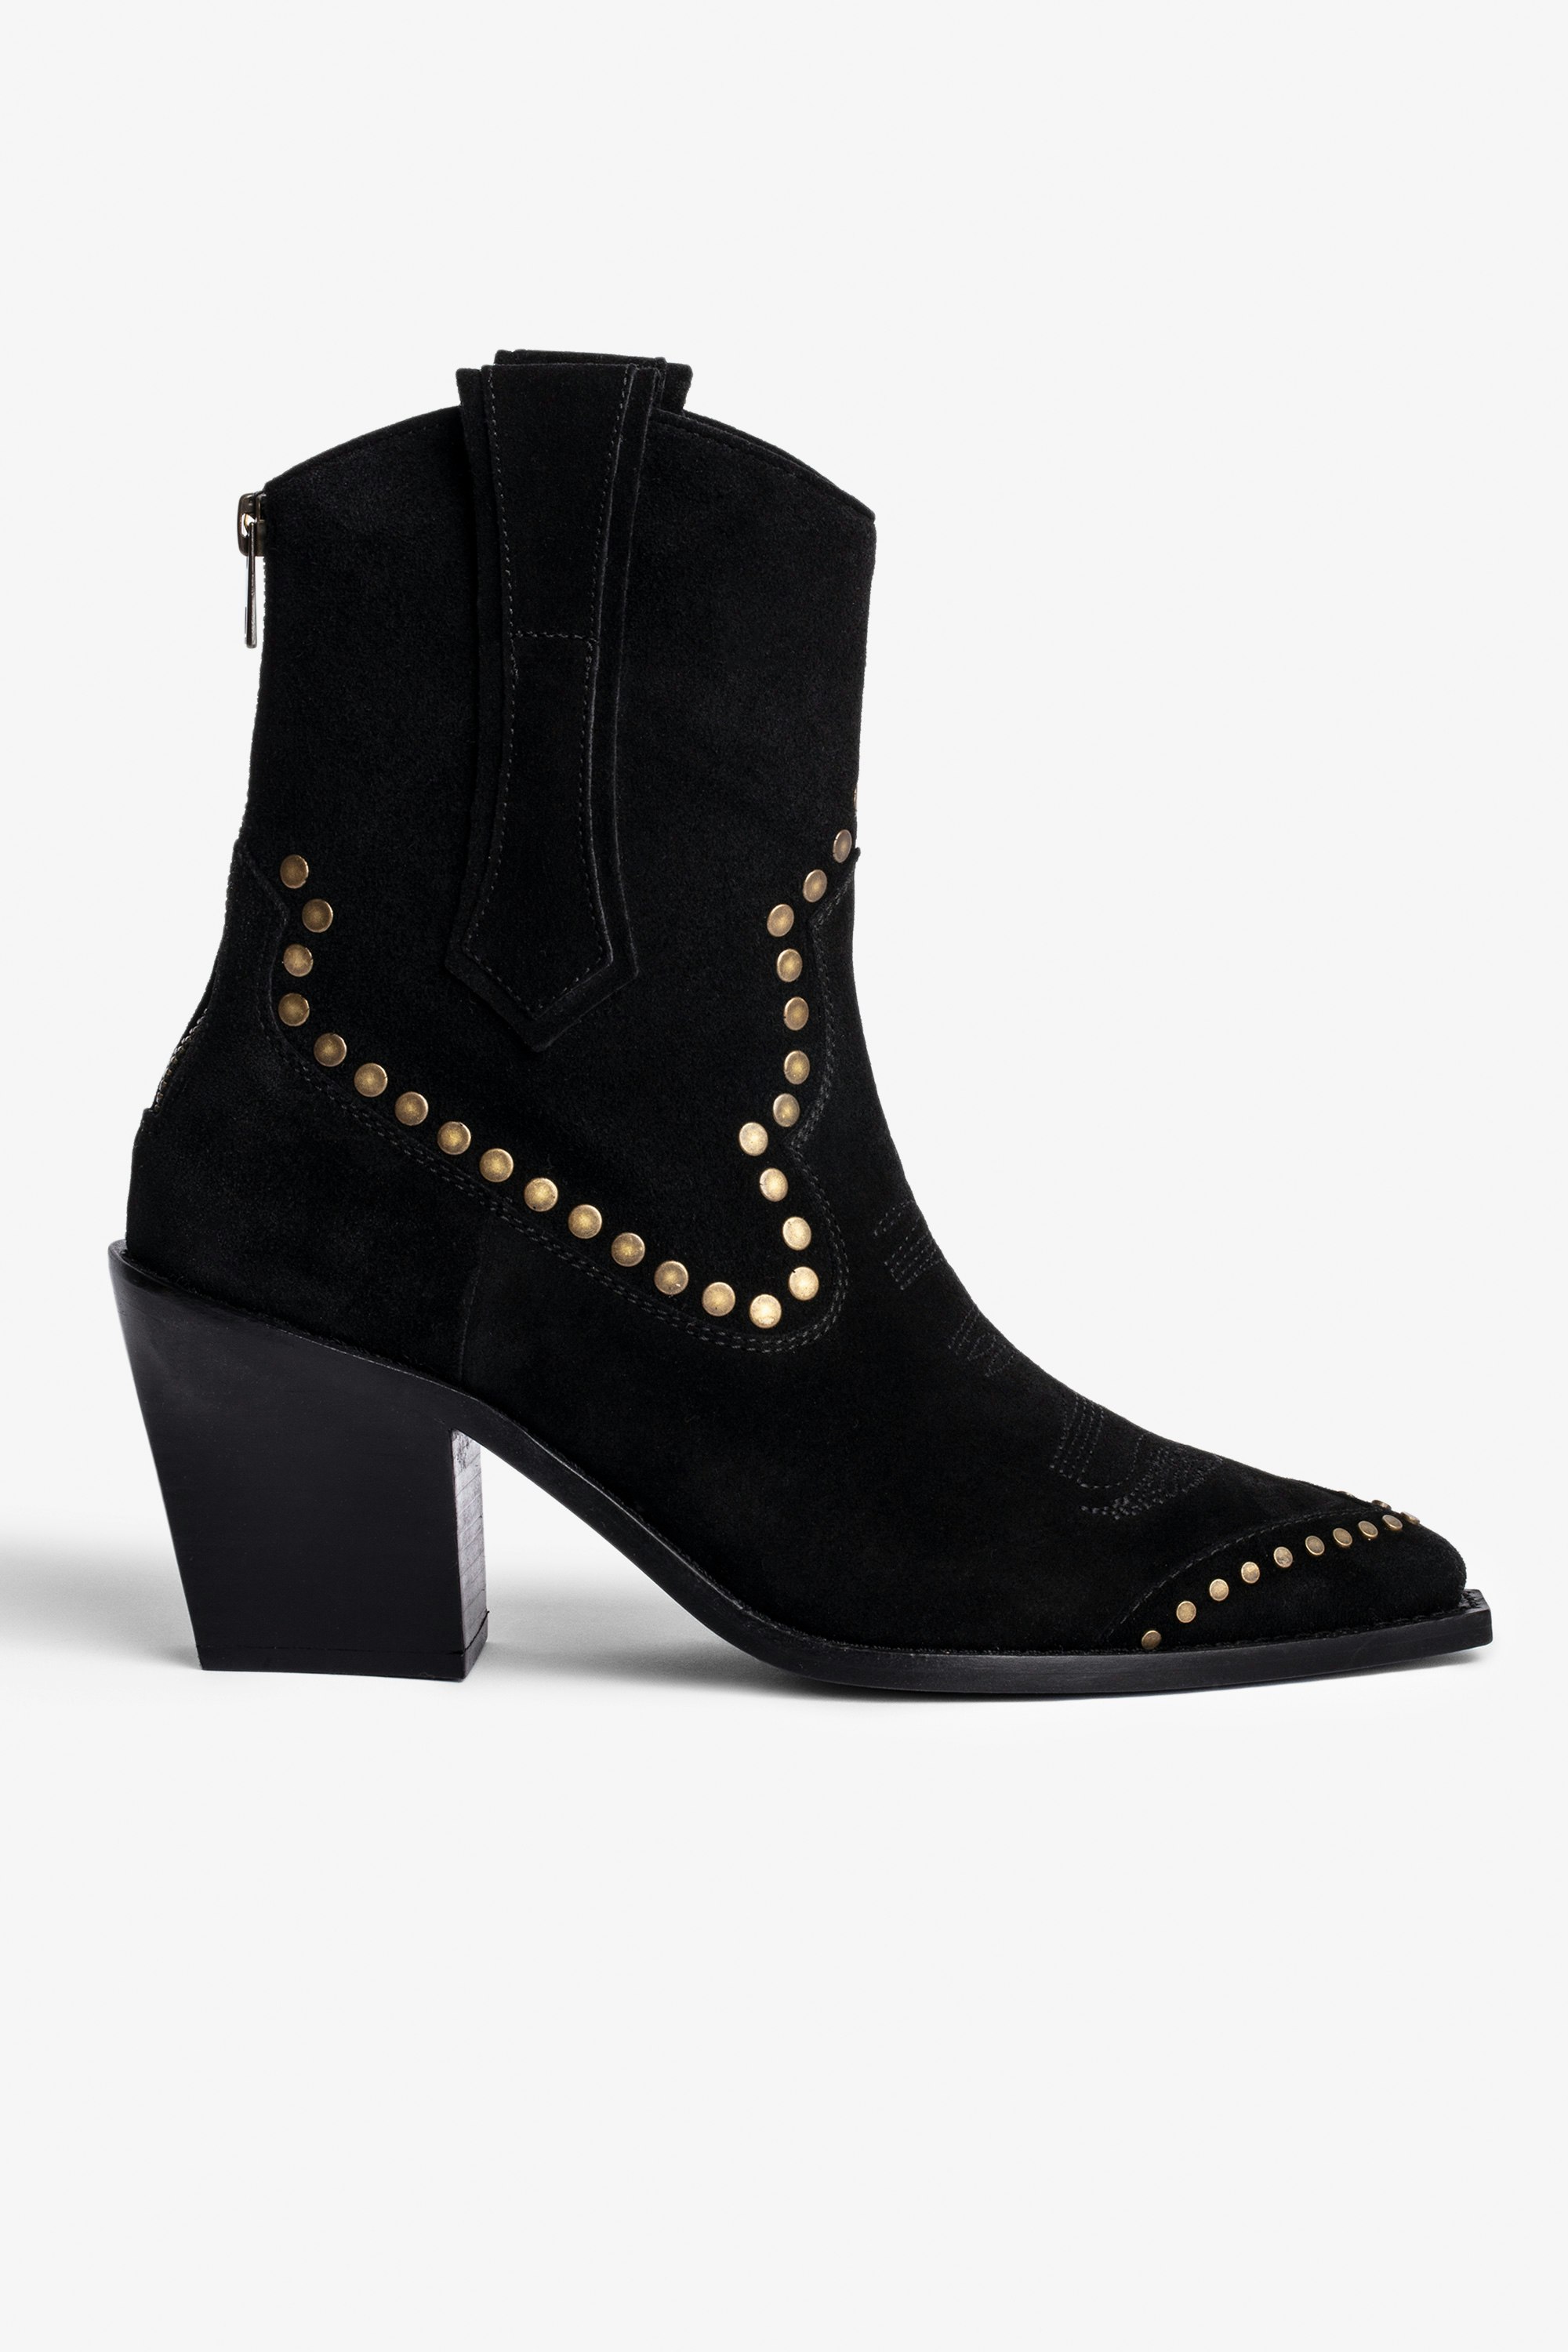 Cara High Boots Leather Women's black suede western ankle boots with gold studs. Buying this product, you support a responsible leather production through Leather Working Group.